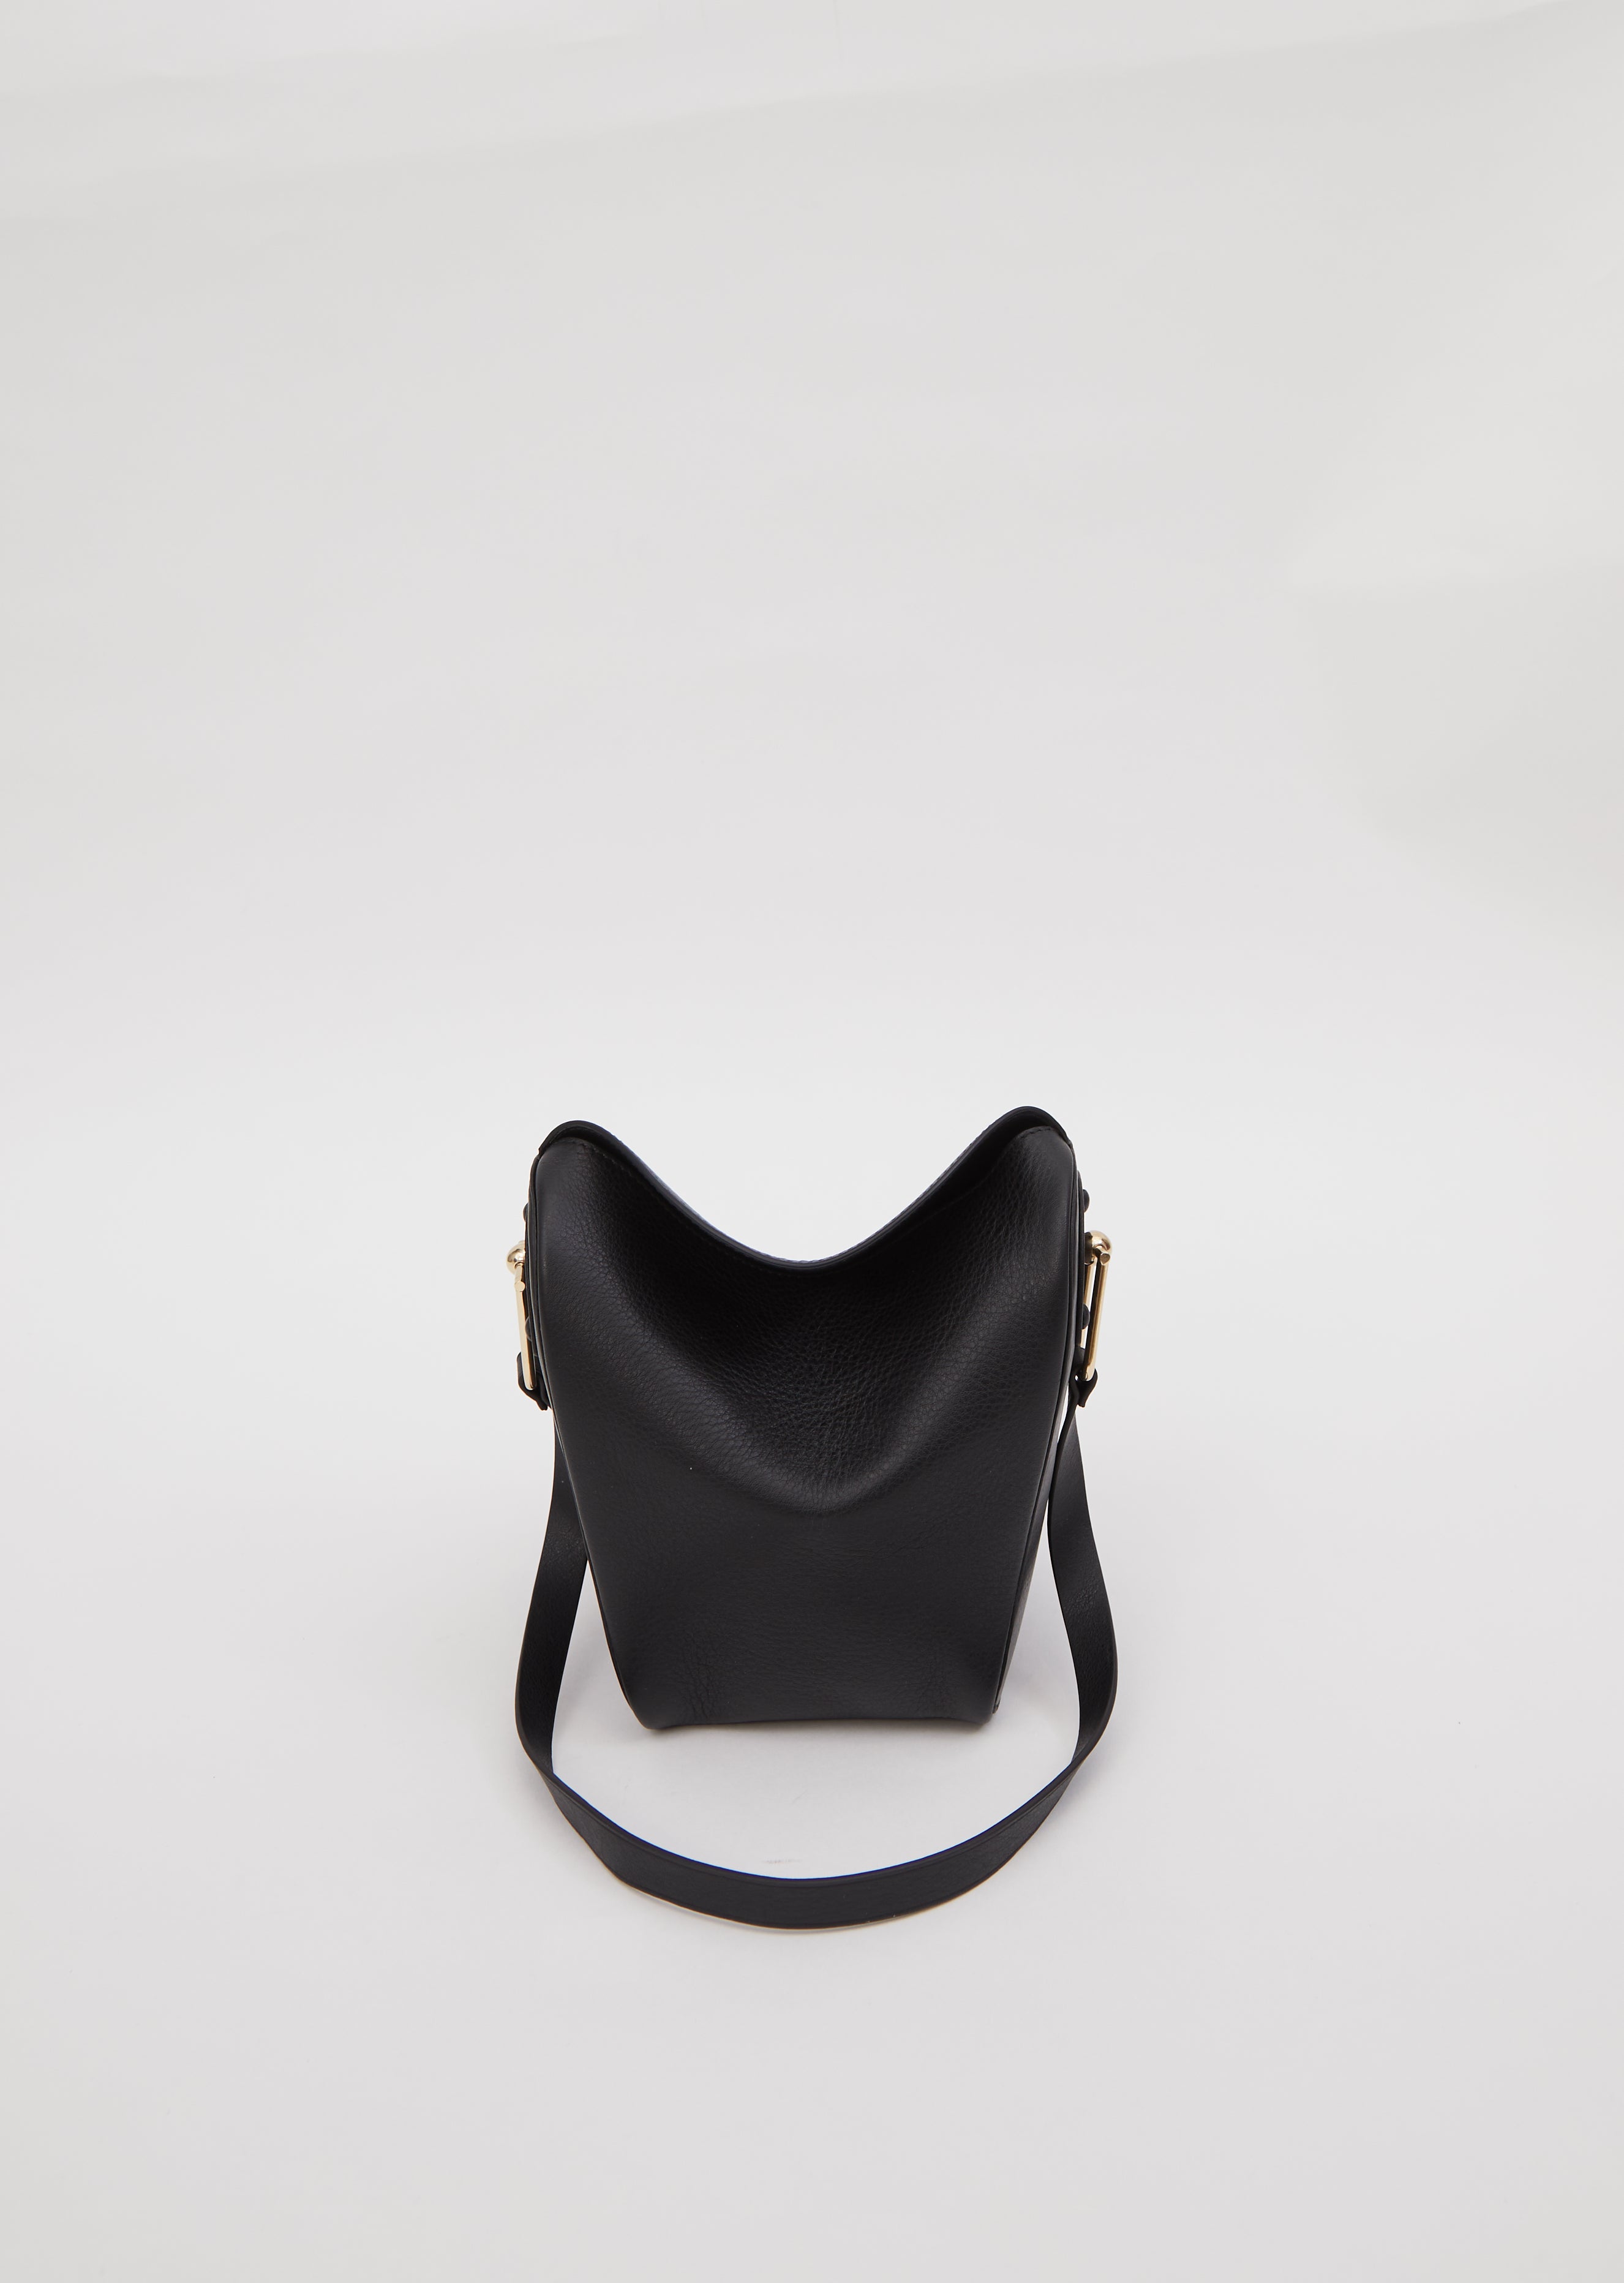 Small Folded Bag - One Size / Black